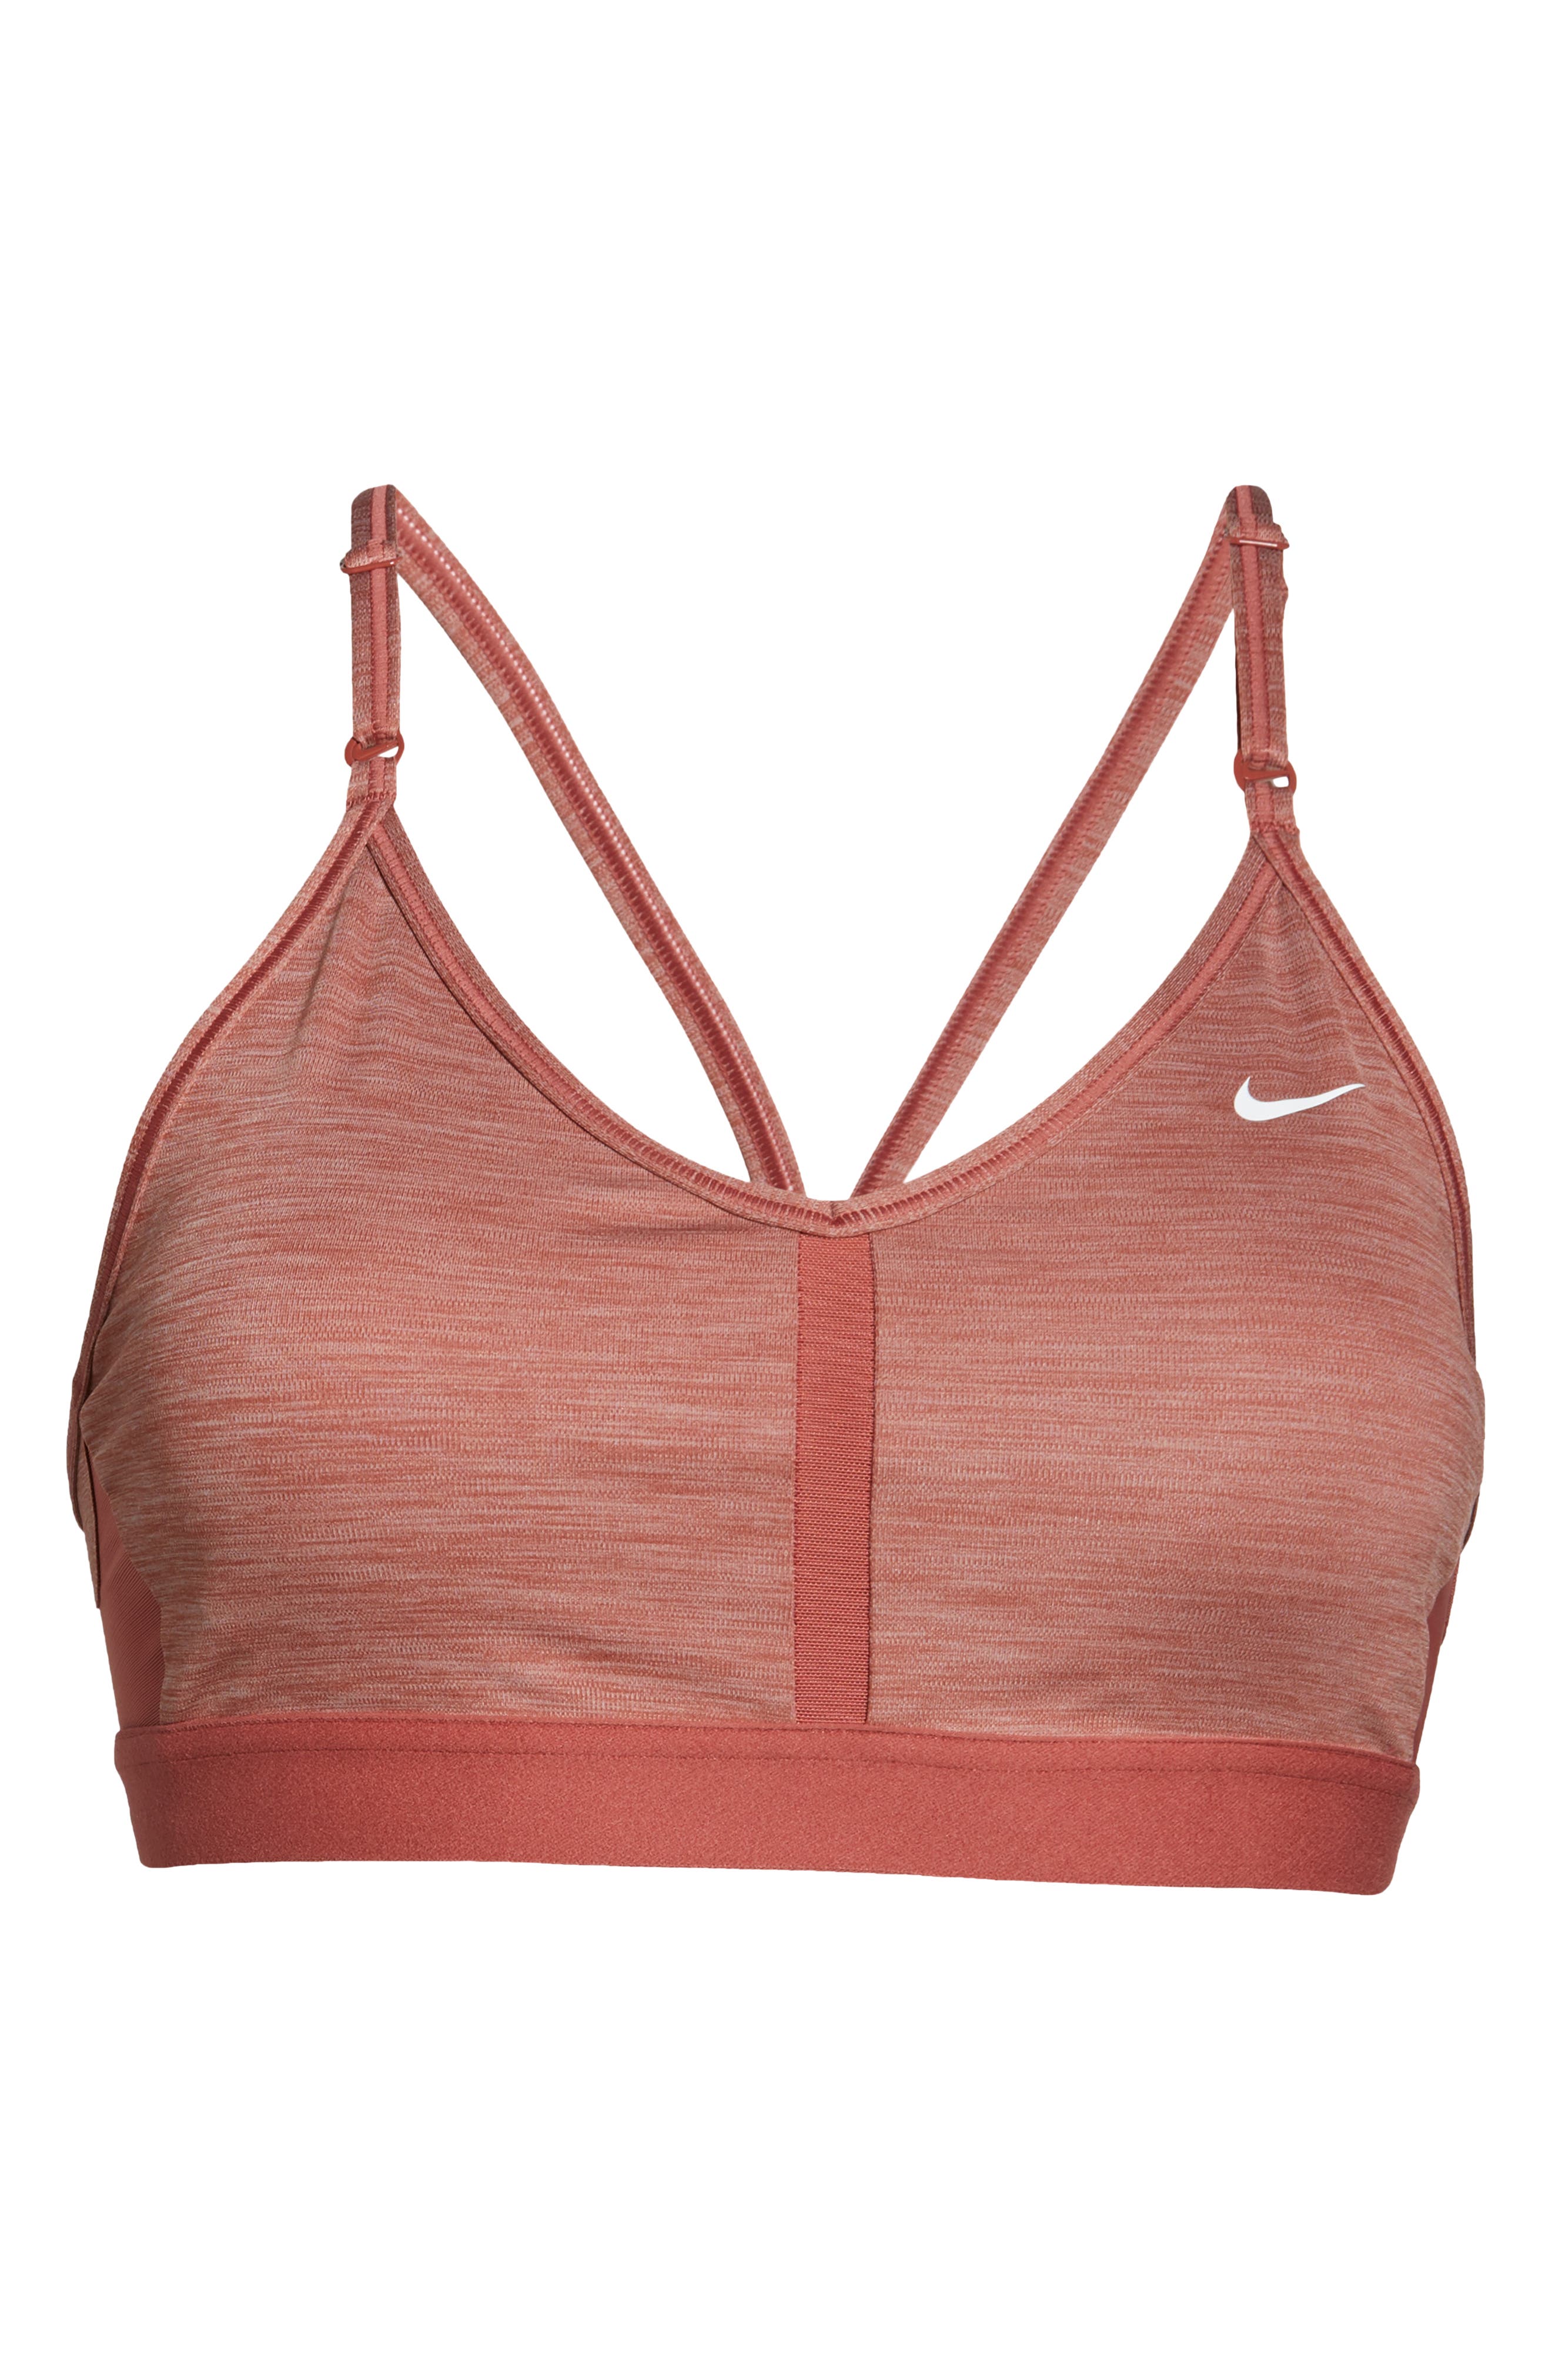 nordstrom nike womens clothing